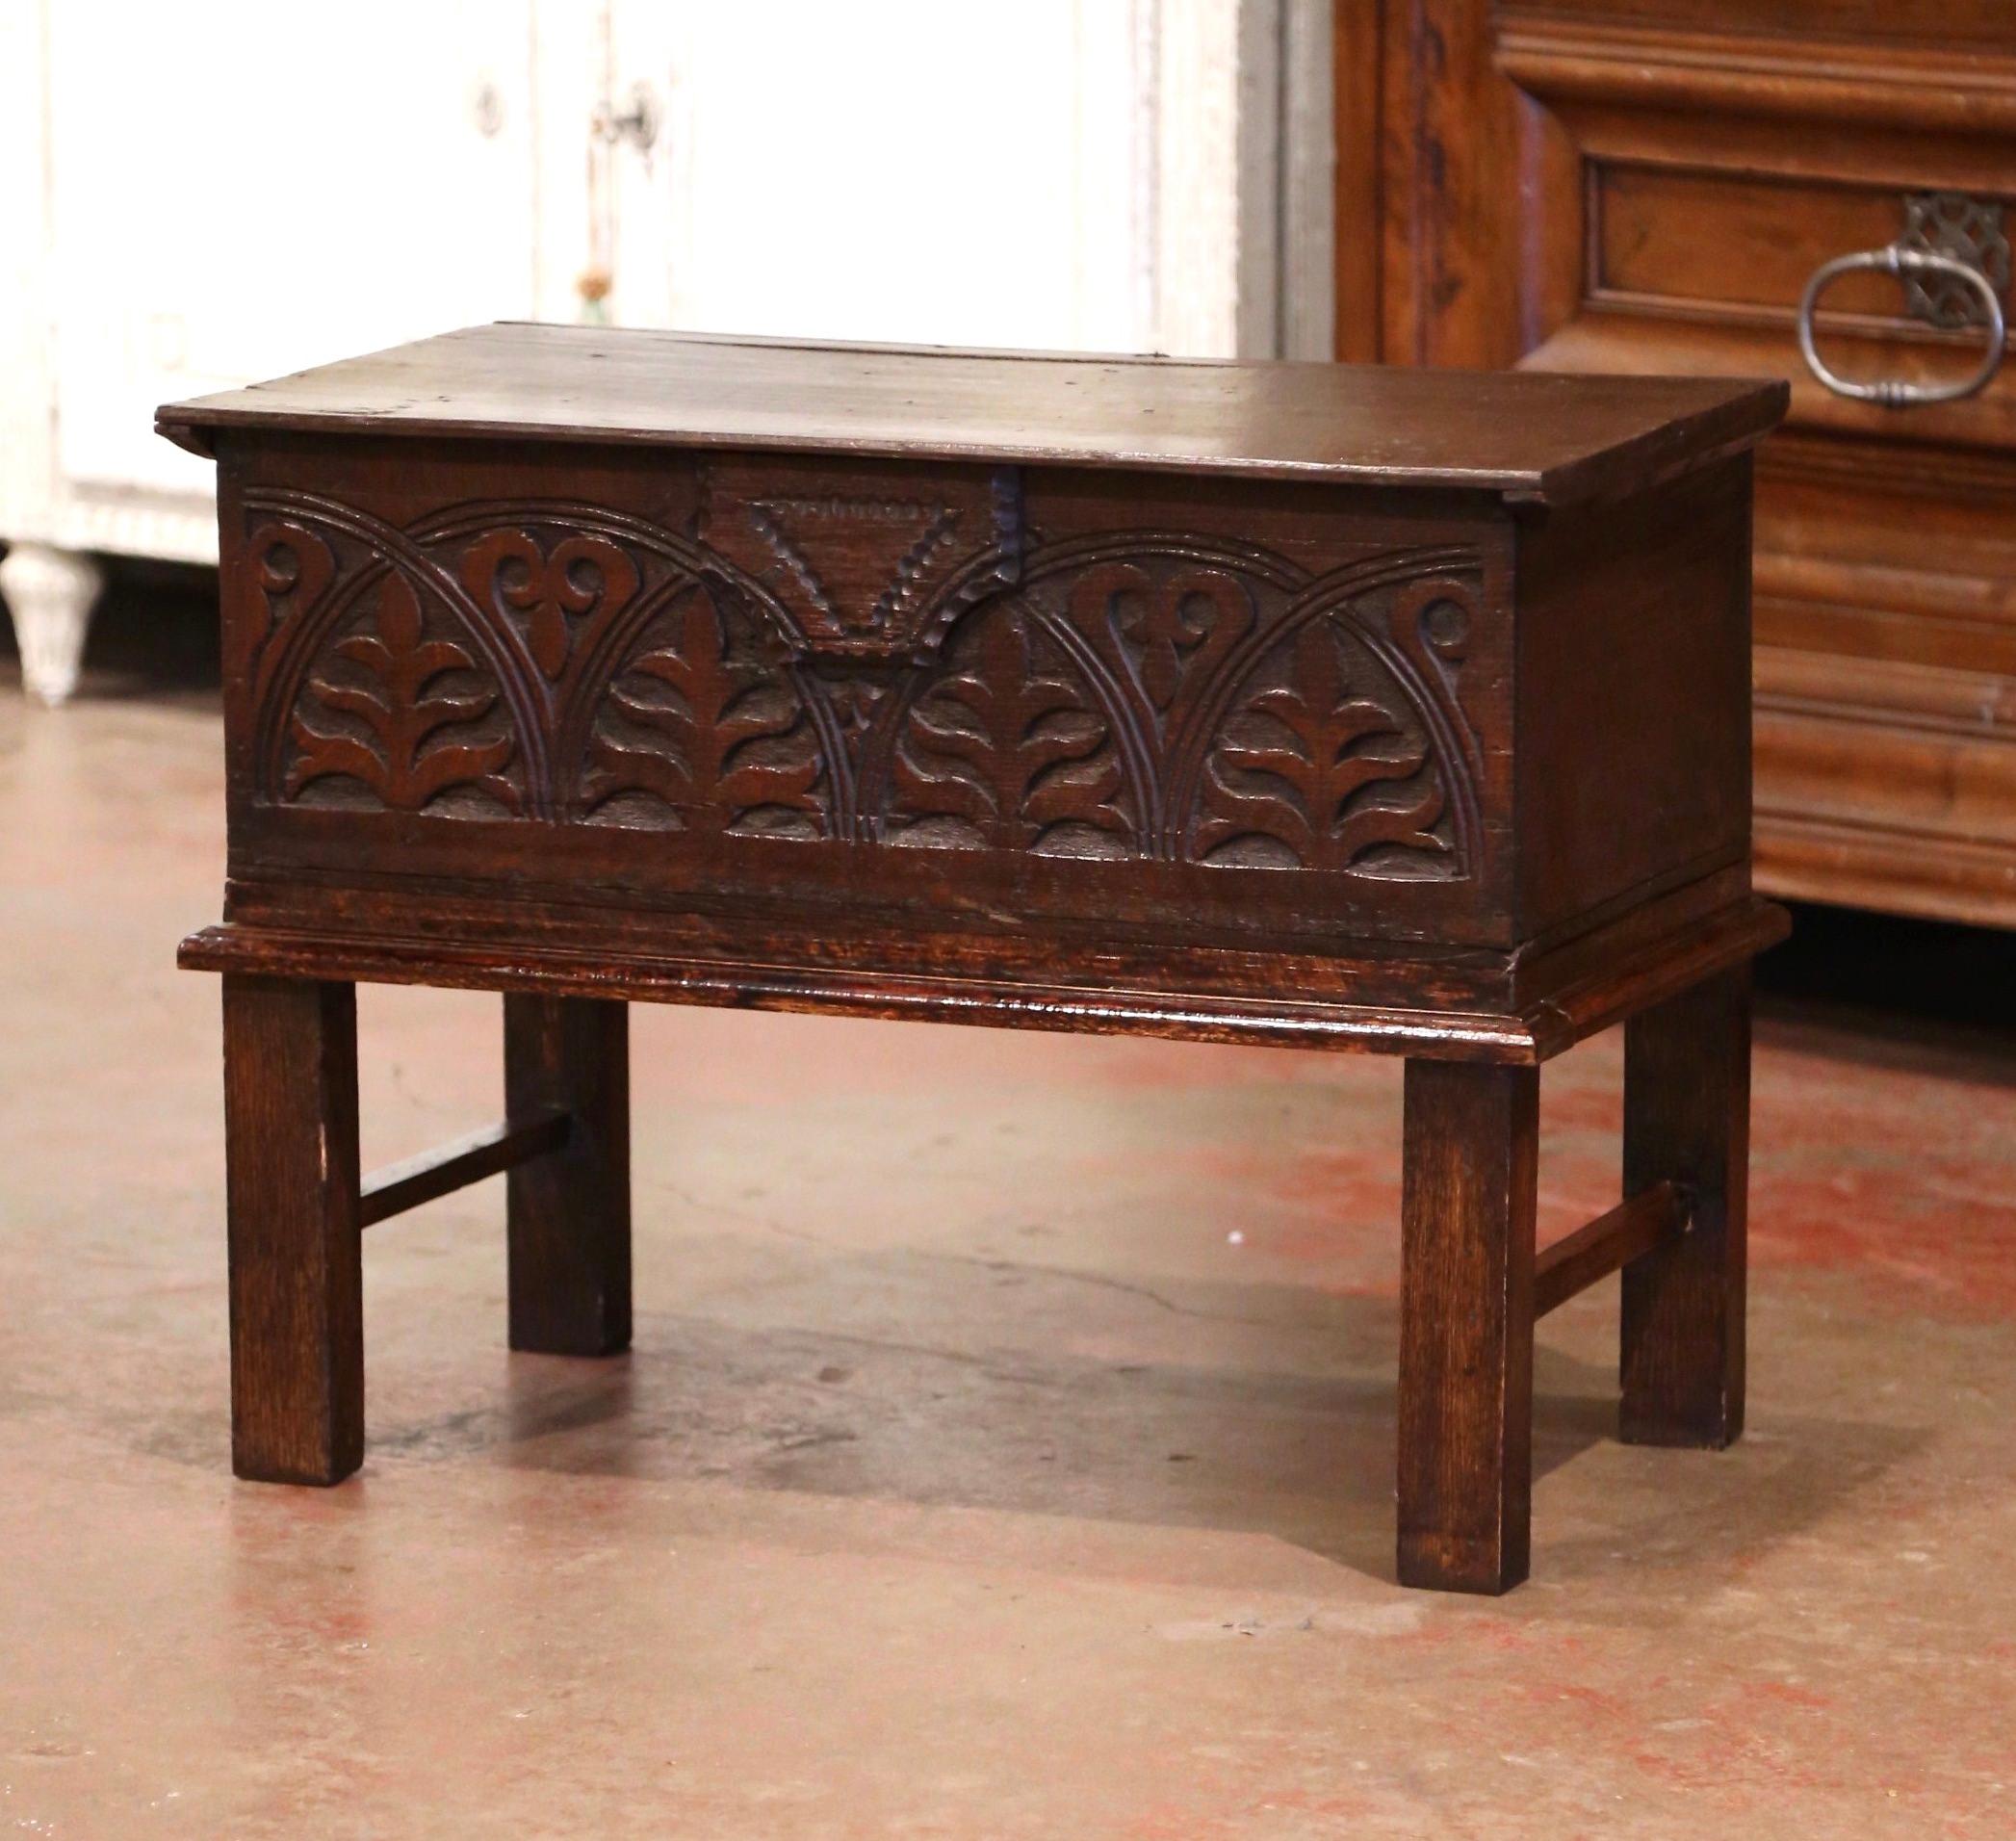 Hand-Carved Mid-19th Century English Carved Oak Bible Box Trunk Side Table on Stand